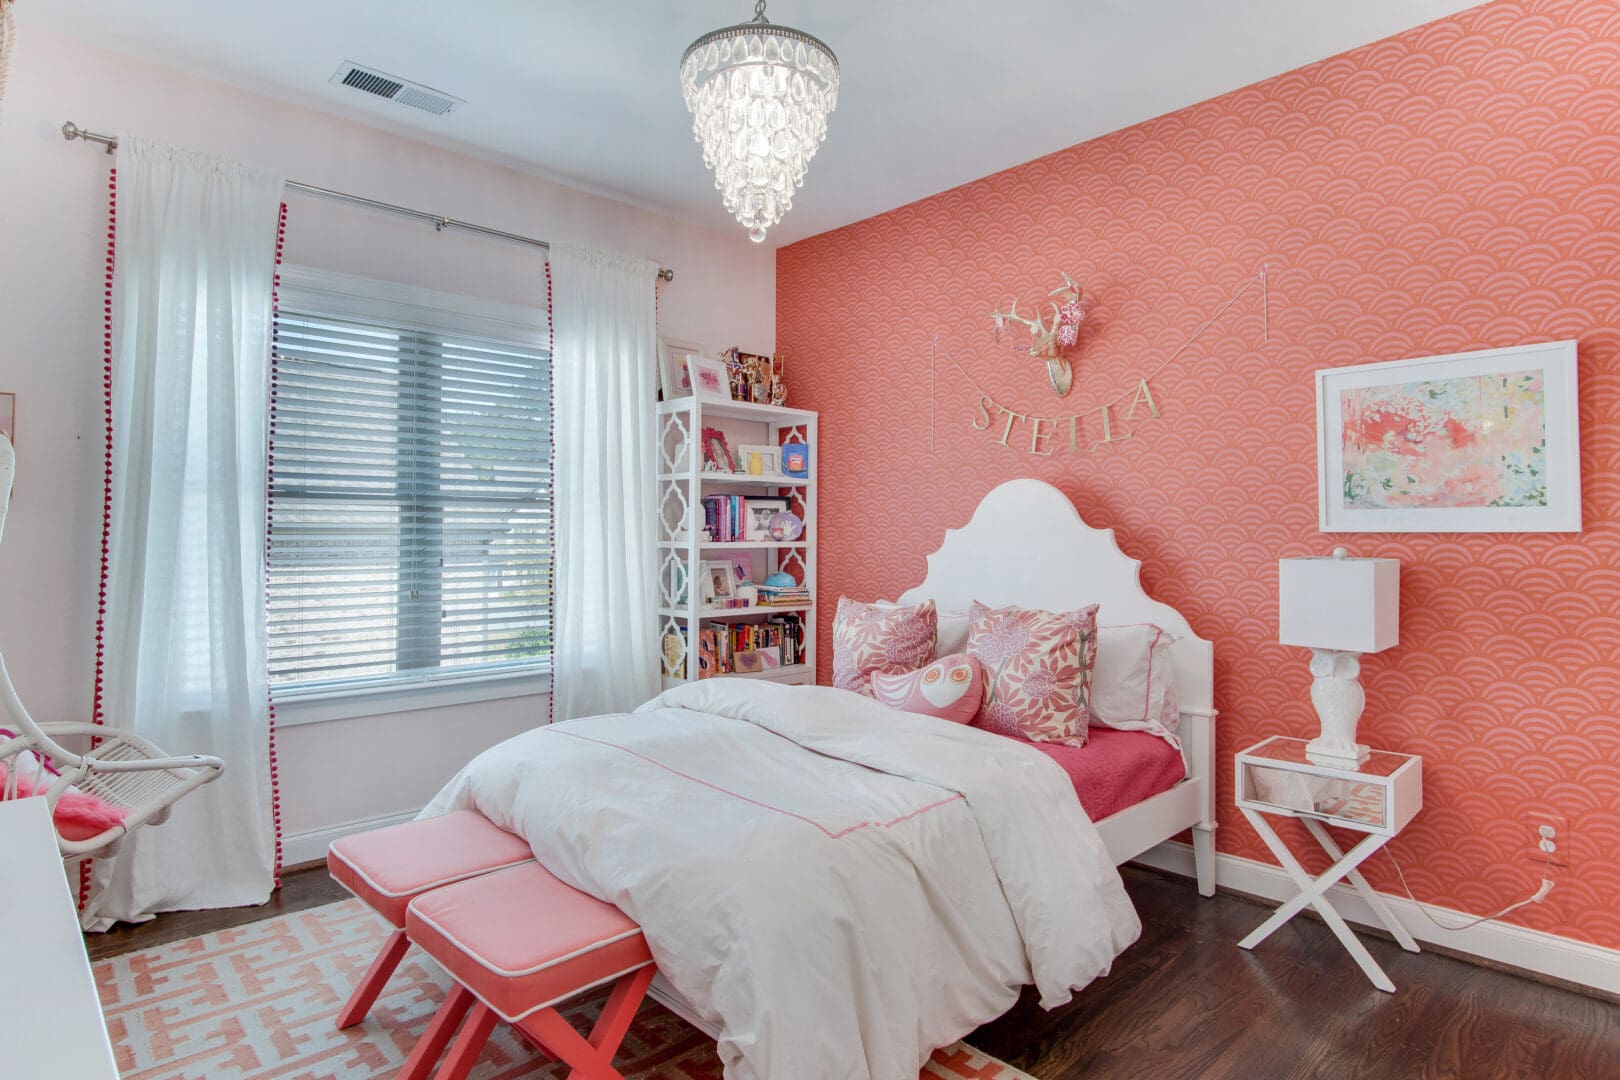 My Georgia Home Tour via Darling Darleen Girl's Tween Bedroom pink and coral with wallpaper || www.darlingdarleen.com || #darlingdarleen #darleenmeier # southernliving 